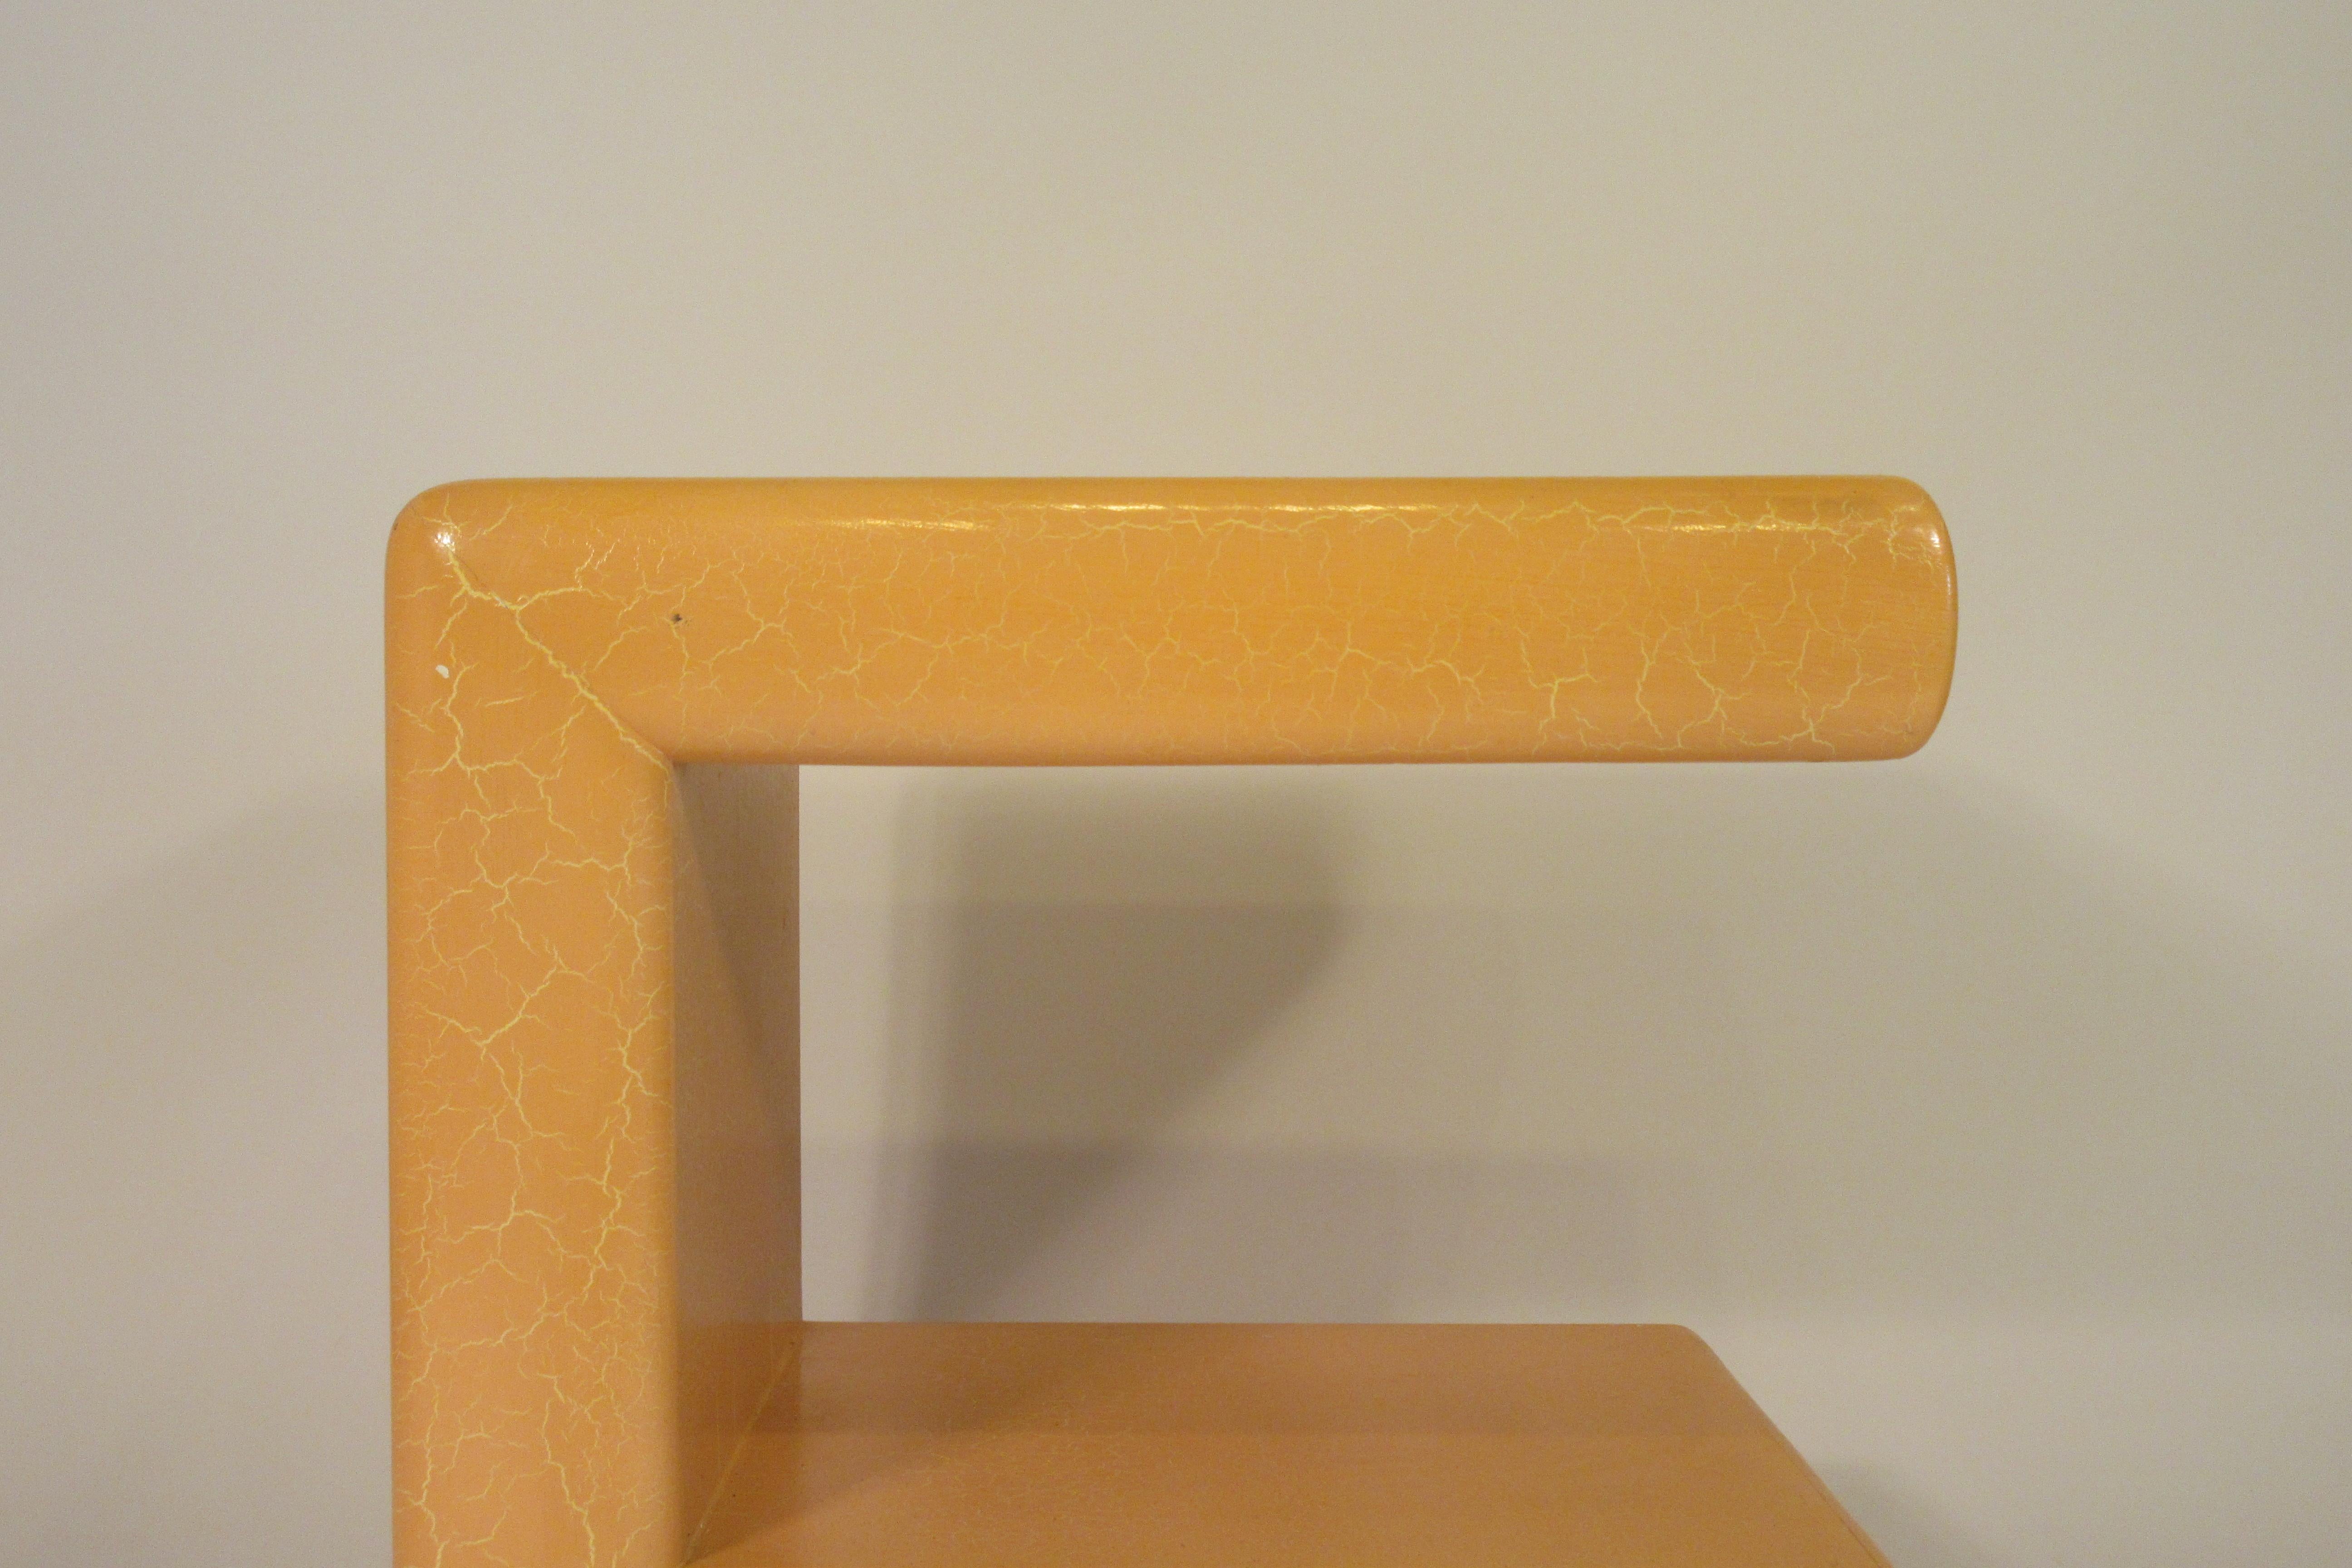 1980s Lacquered Geometric Side Table (Ende des 20. Jahrhunderts)